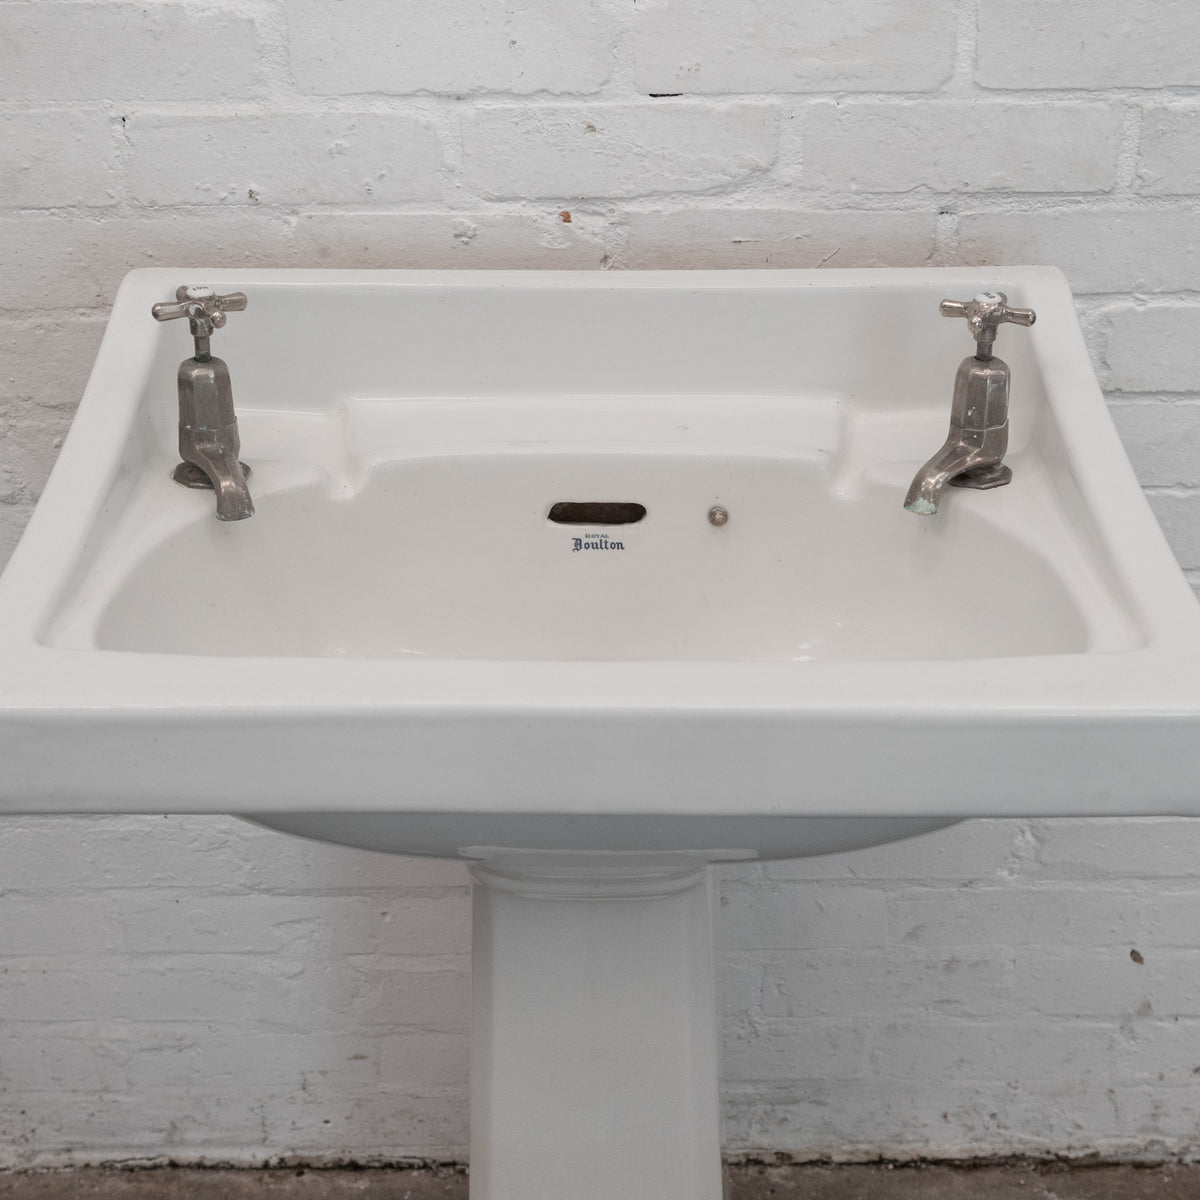 Reclaimed Royal Doulton Sink on Pedestal Stand | The Architectural Forum